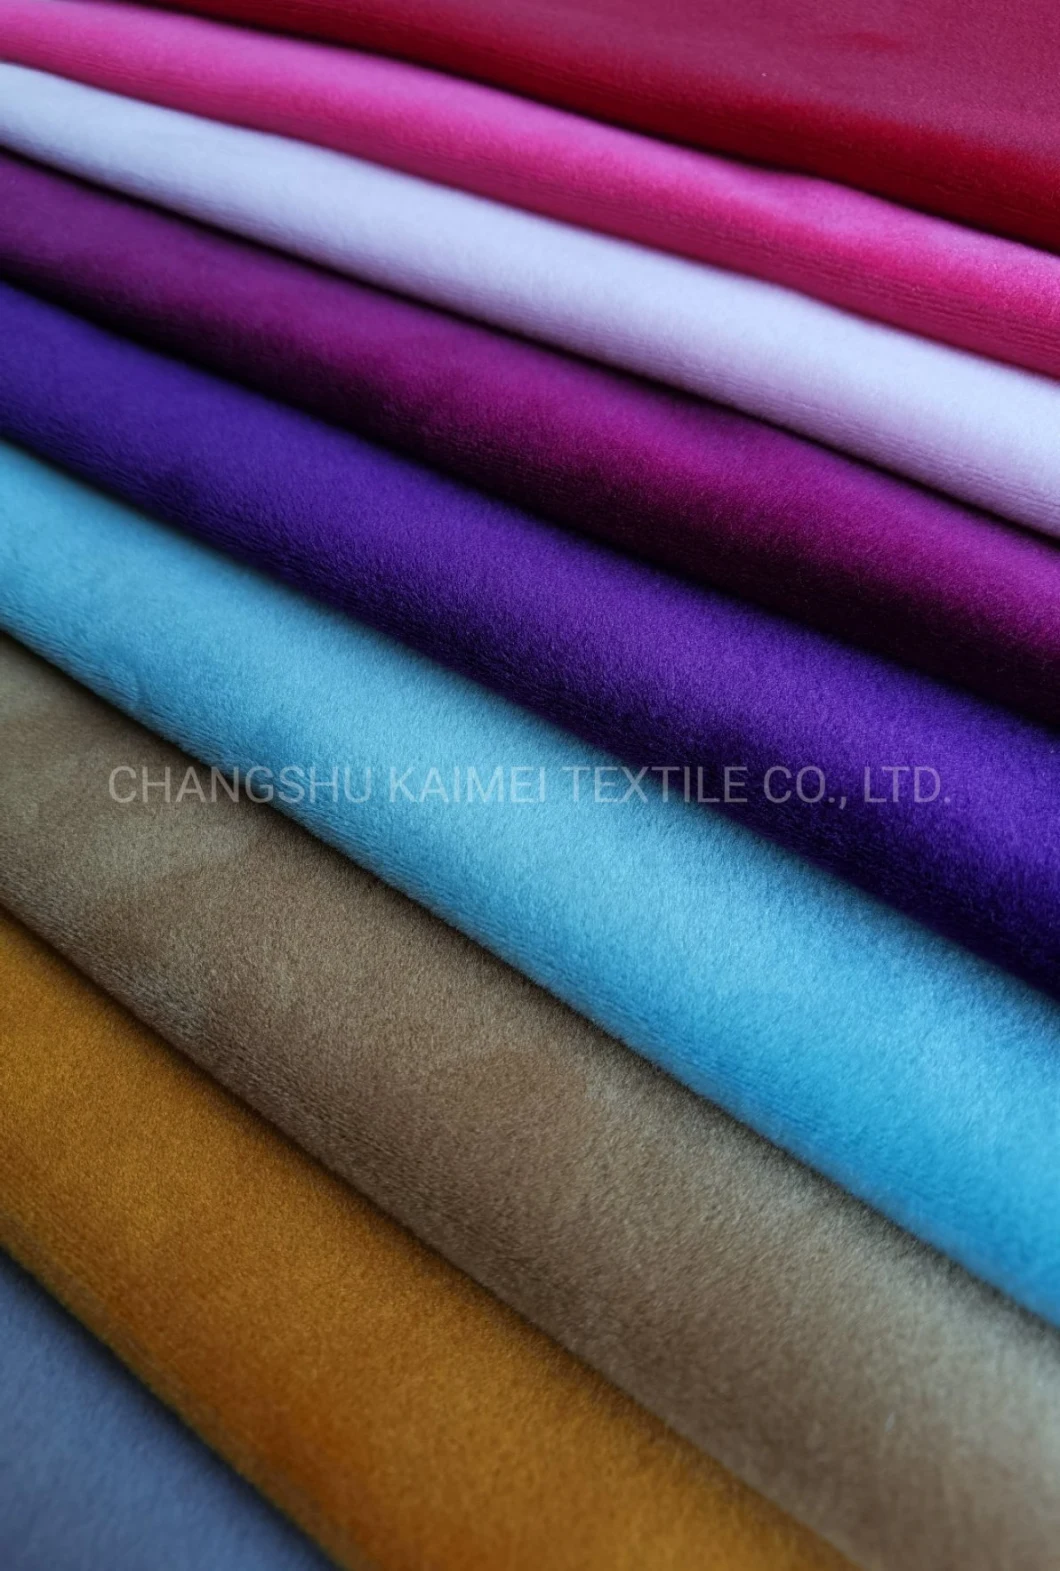 Warp Knitting Super Soft Velvet/Velour Fabric with Spandex for Autumn Winter Clothes and Blanket